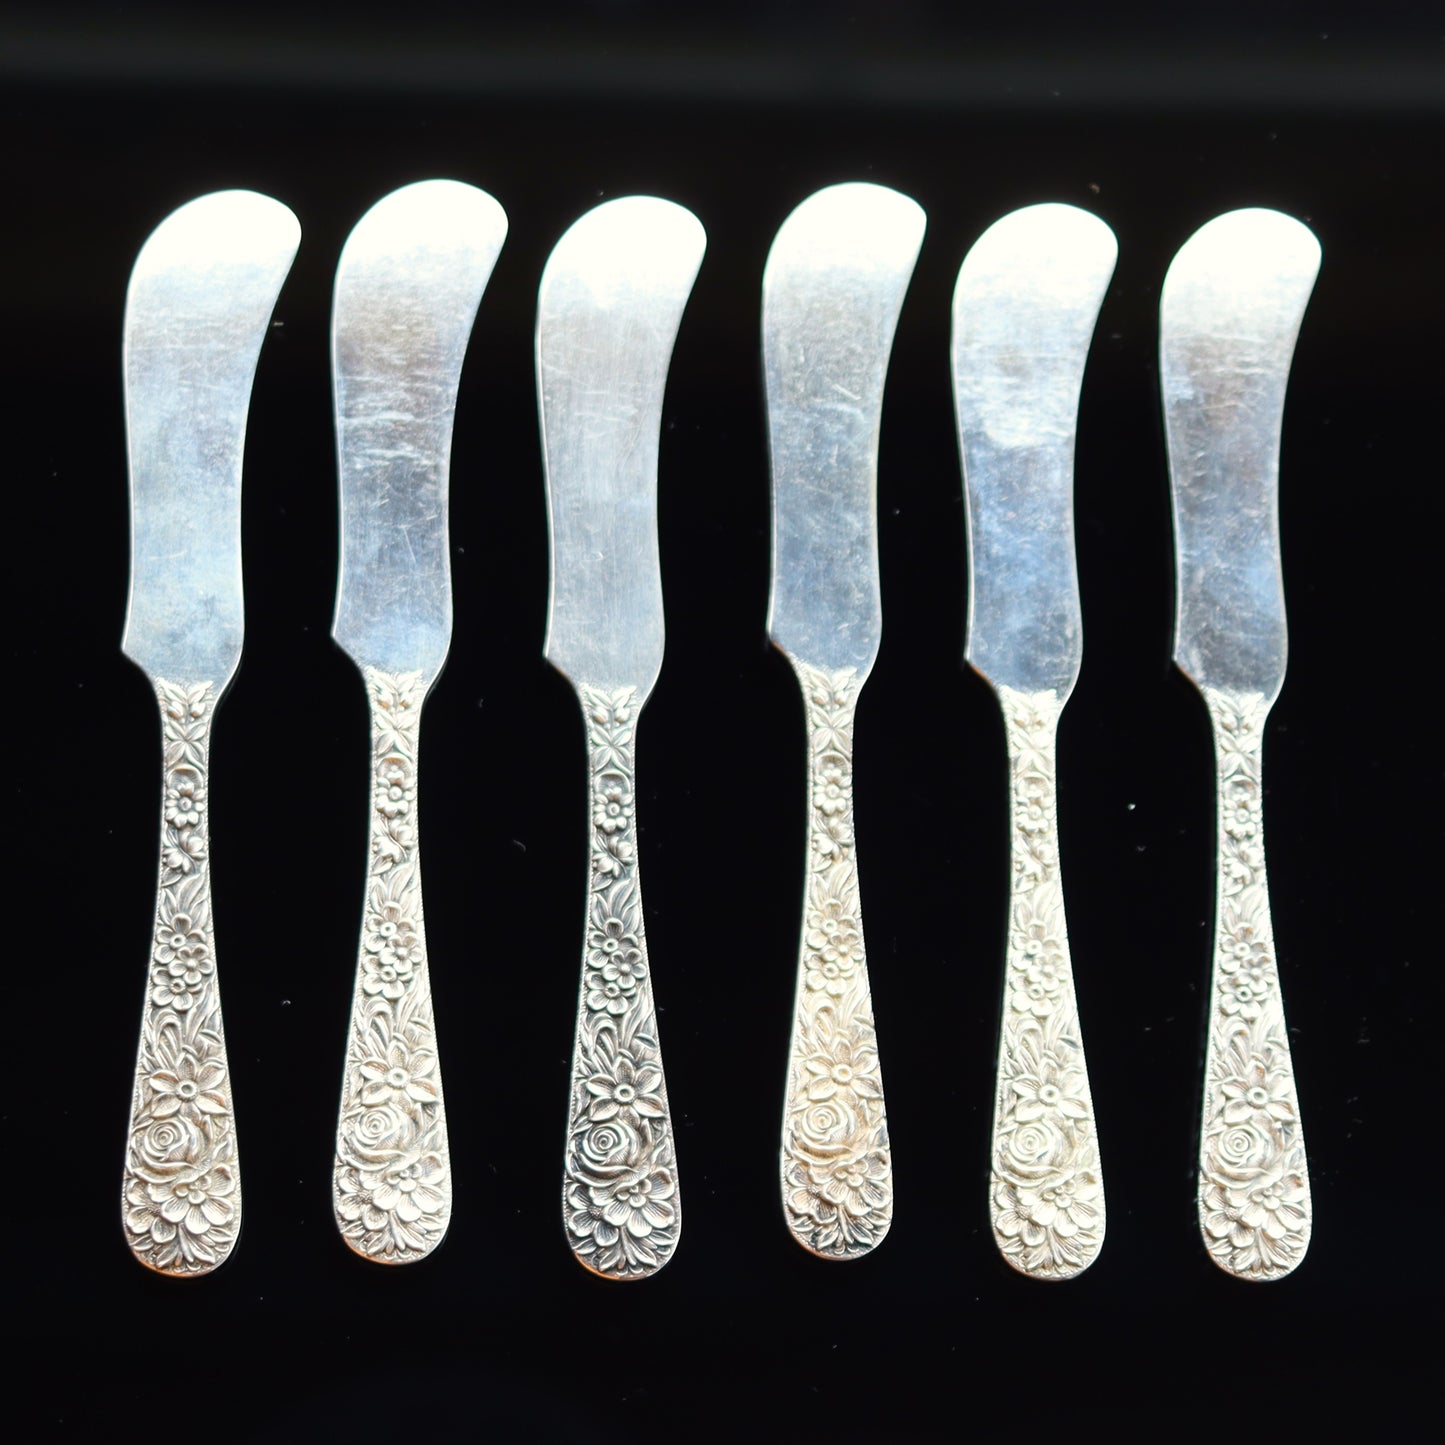 6 Vtg S Kirk & Son Sterling Silver Butter Cheese Knives Repousse Pattern 5.25"